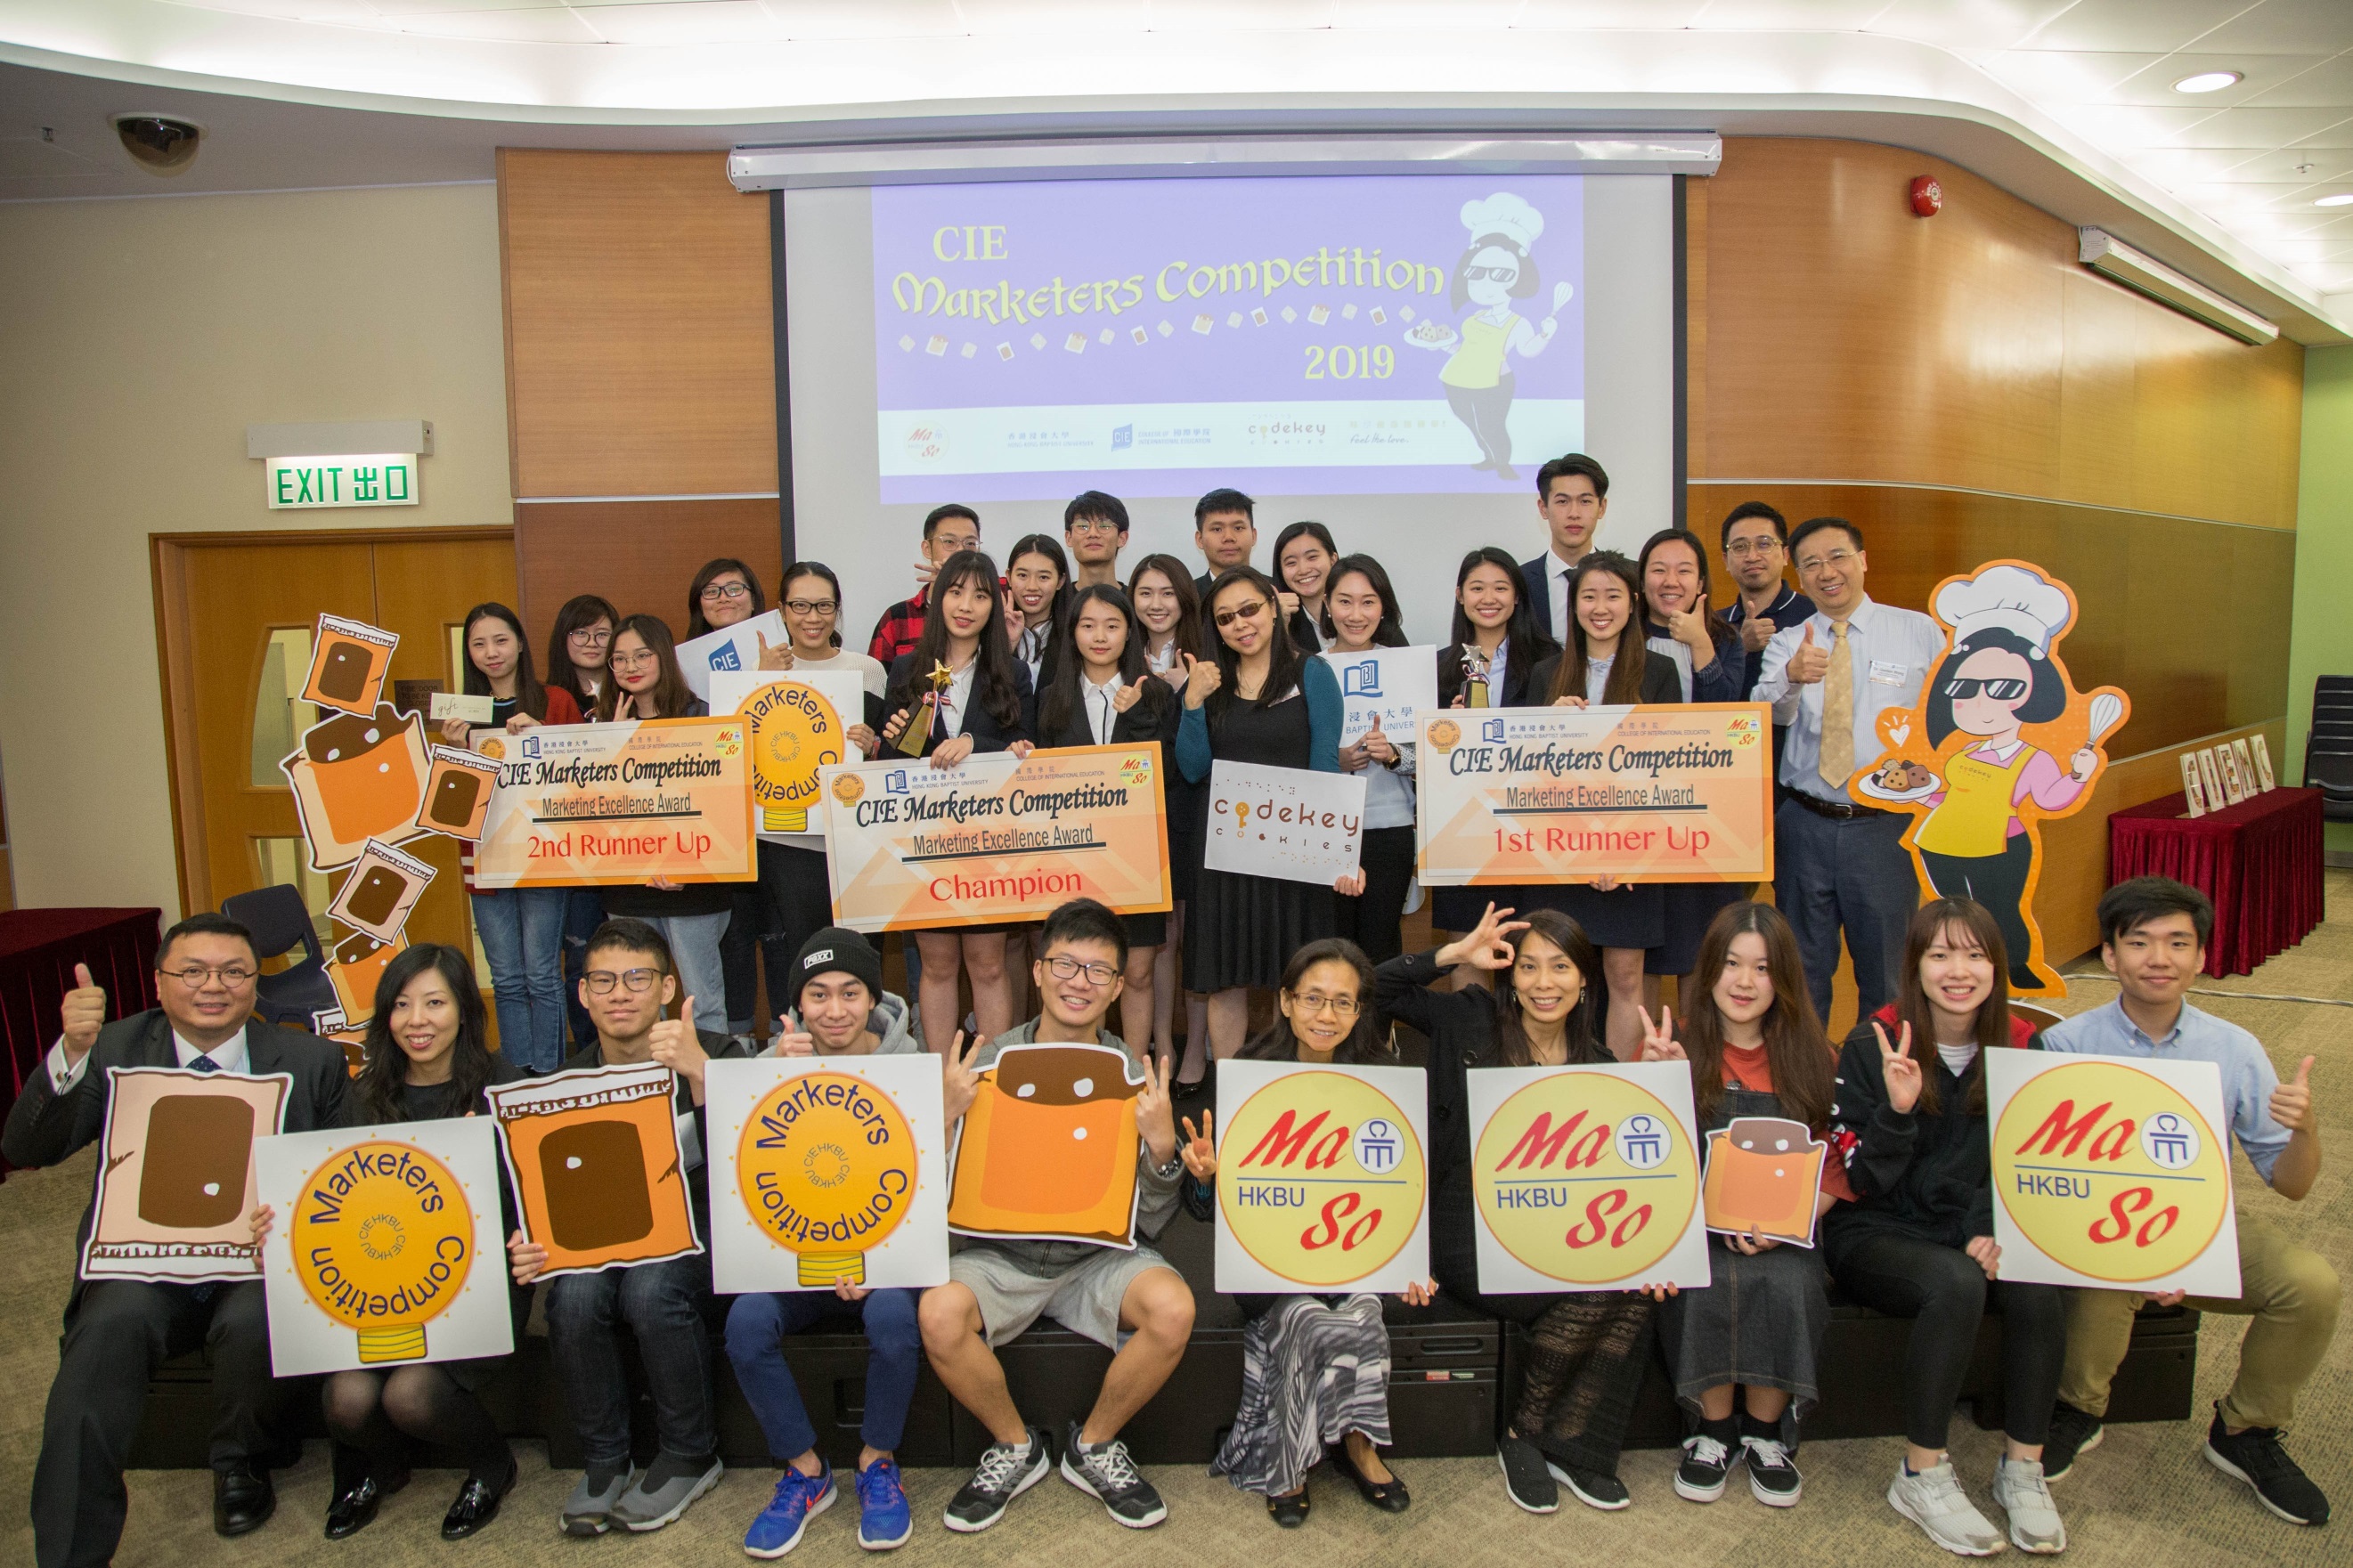 HKBU CIE and Codekey Cookies co-organise Marketers Competition 2019